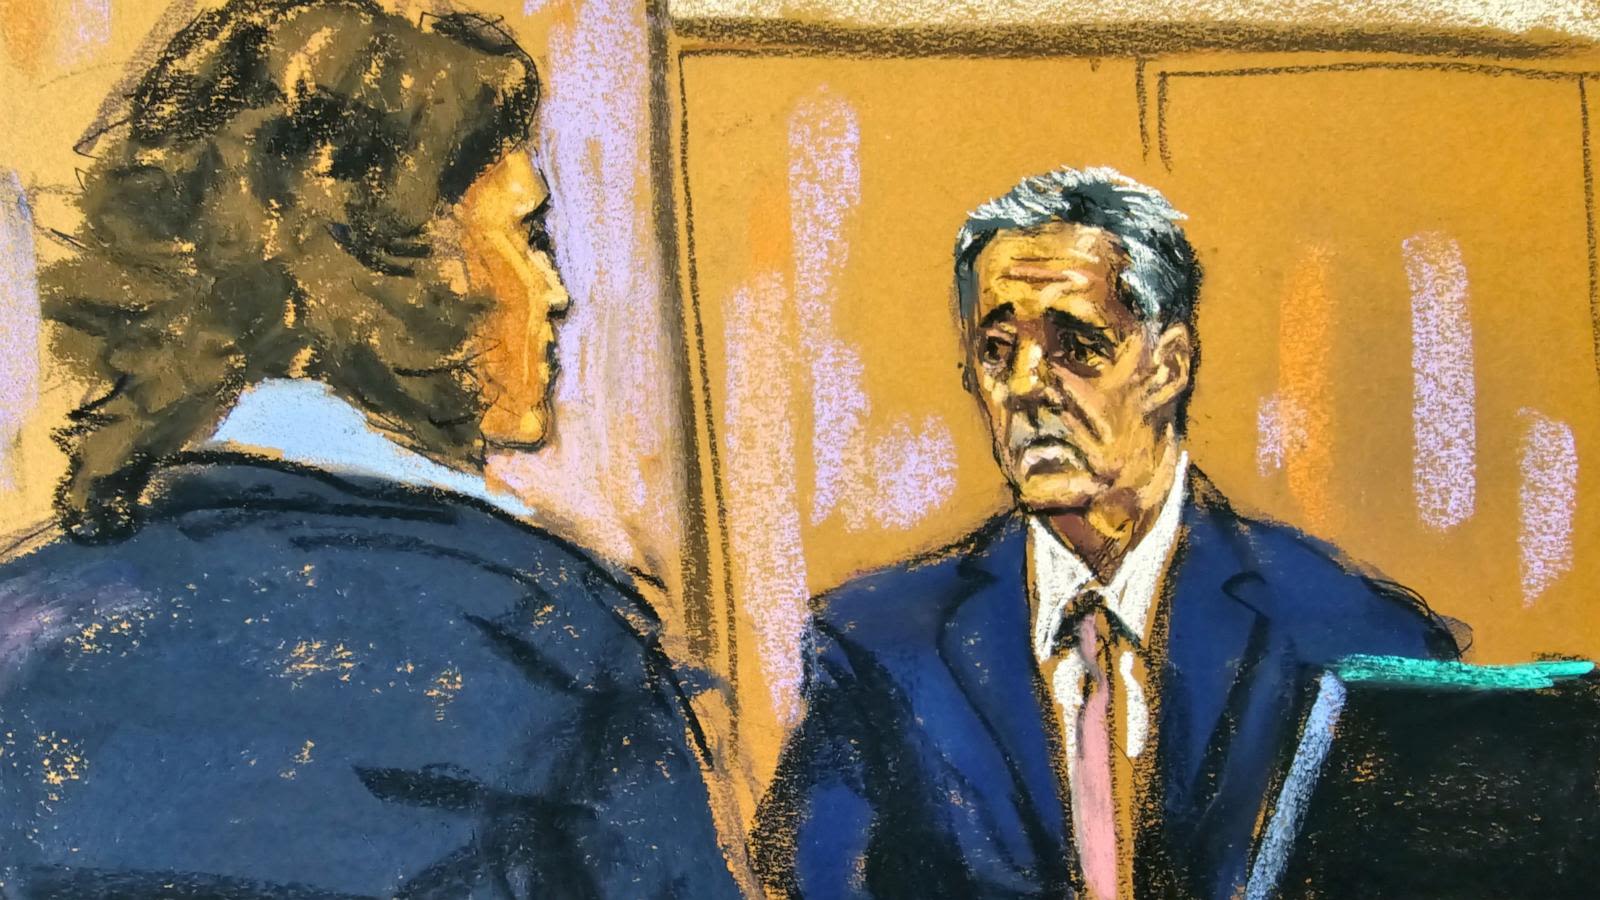 Trump trial live updates: Michael Cohen to return for 2nd day of testimony